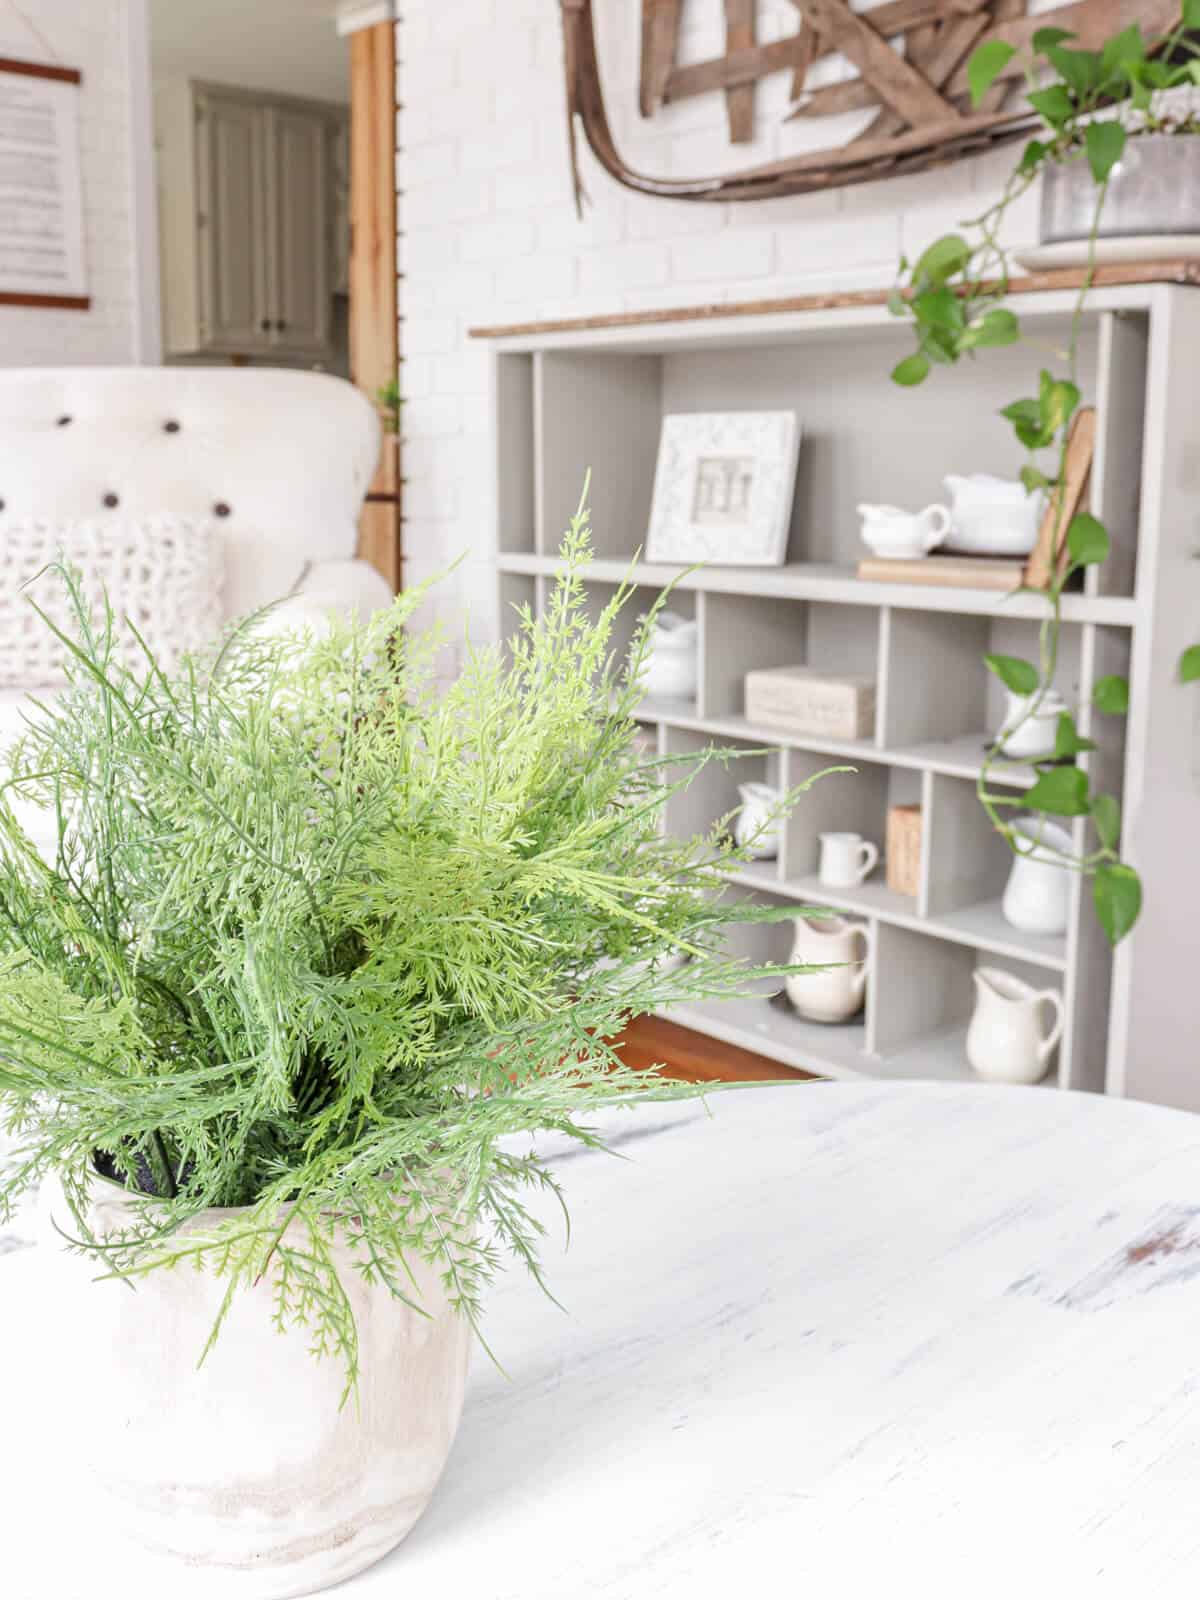 fern in a wooden planter in front to a bookcase filled with vintage creamer pitchers